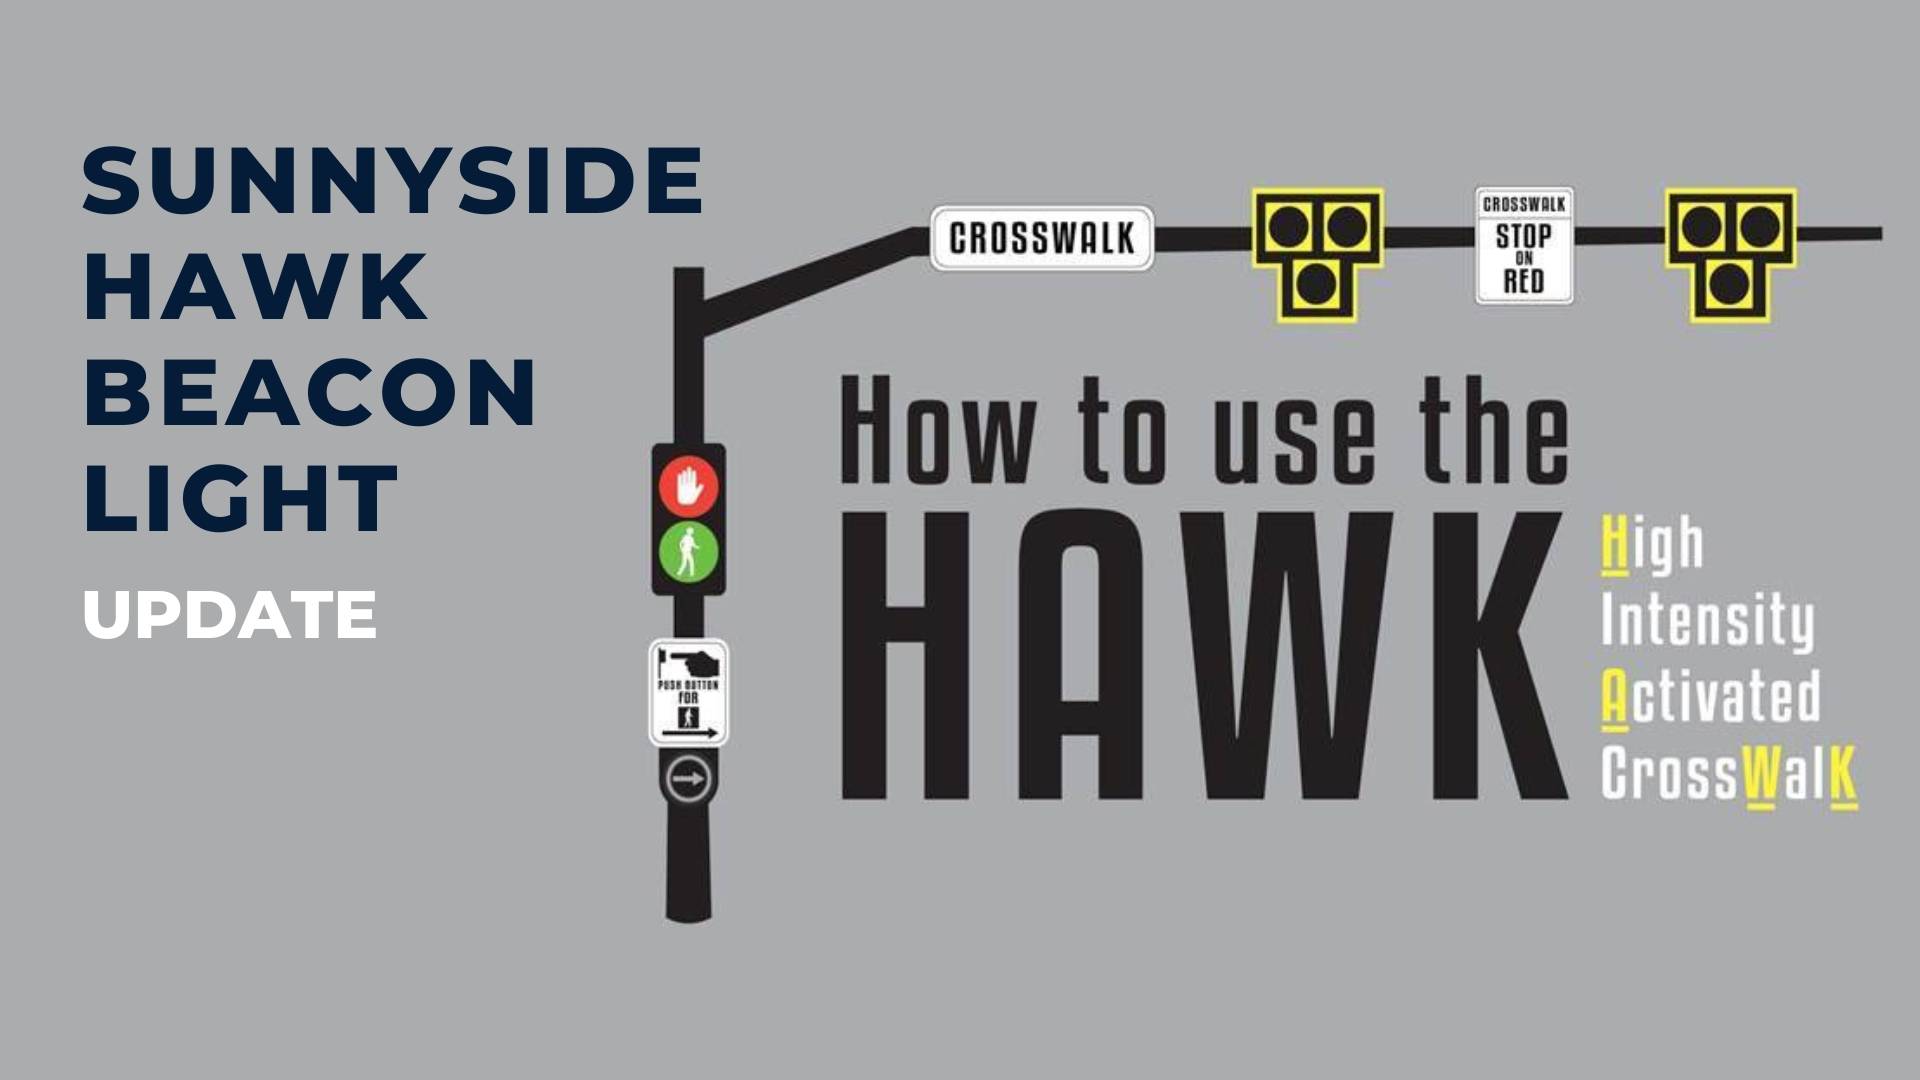 The SVCA shares how to navigate the new HAWK beacon light system recently installed by Sunnyside Elementary School on San Miguel Road. Read more.